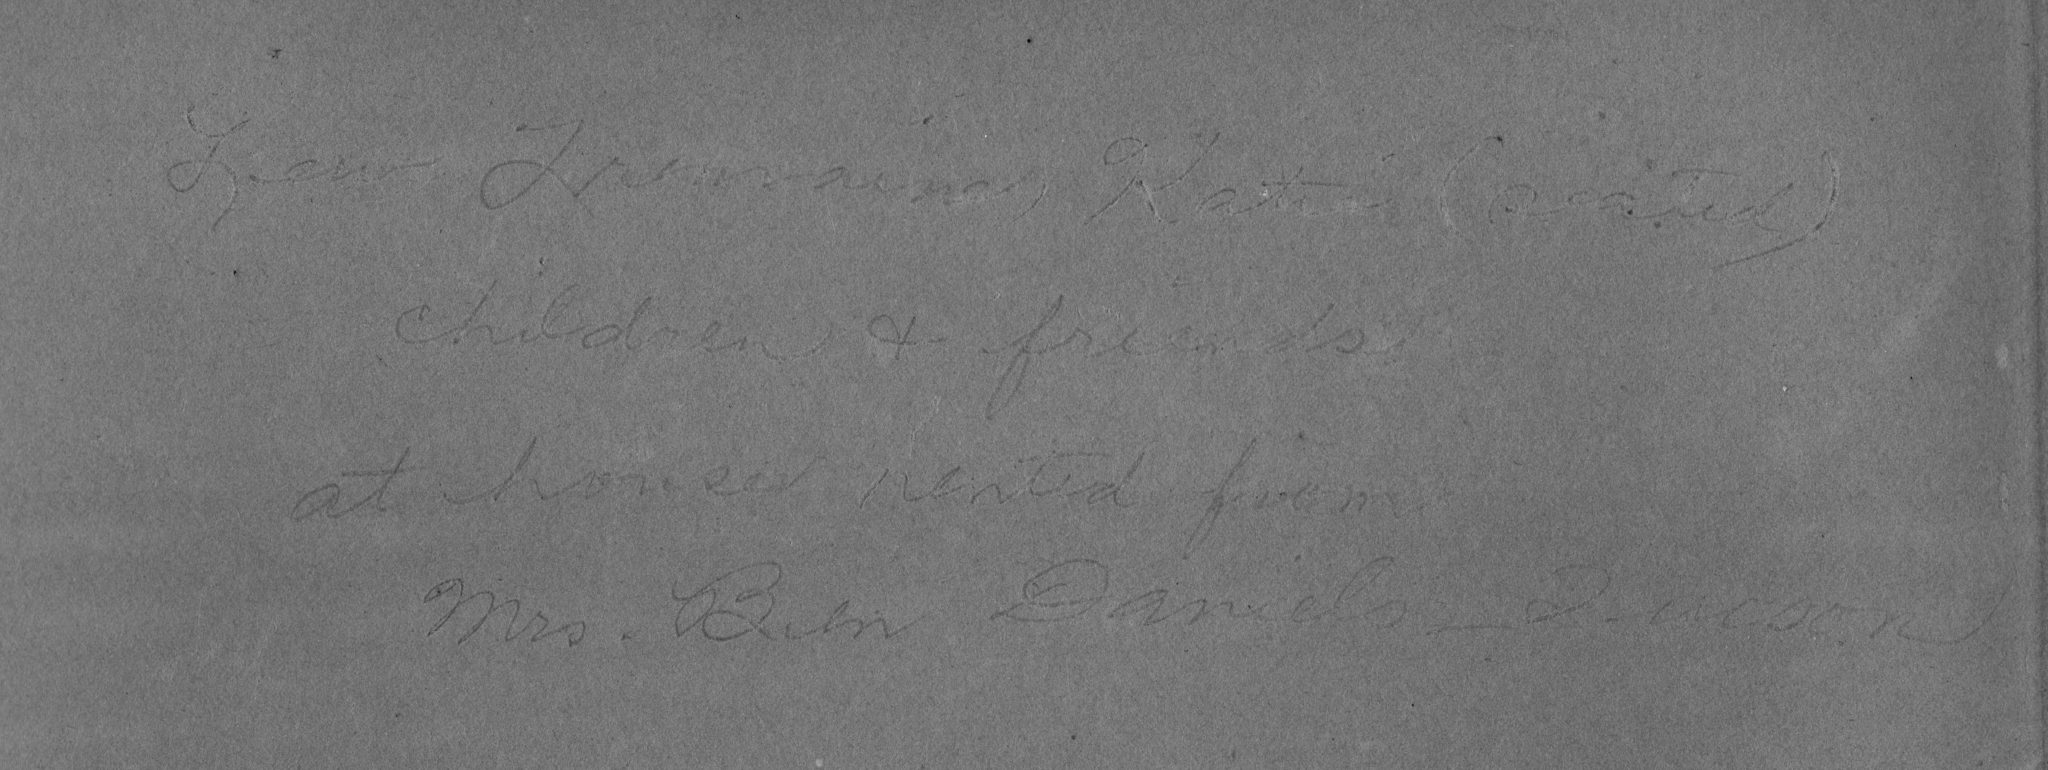 Reverse of Tucson Residence - address unknown